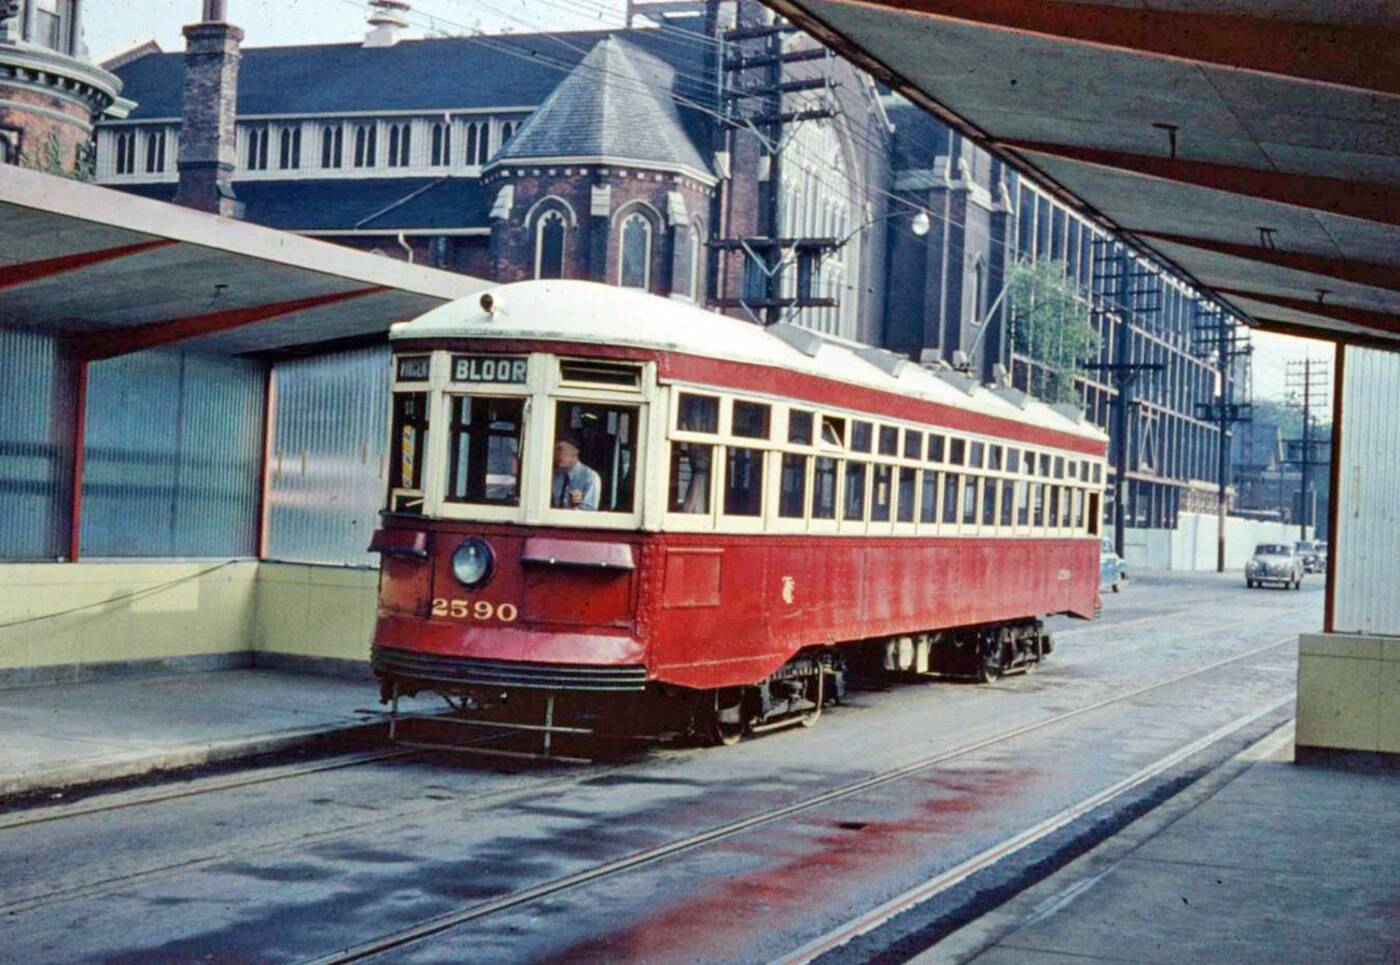 This is what streetcars used to look like in Toronto